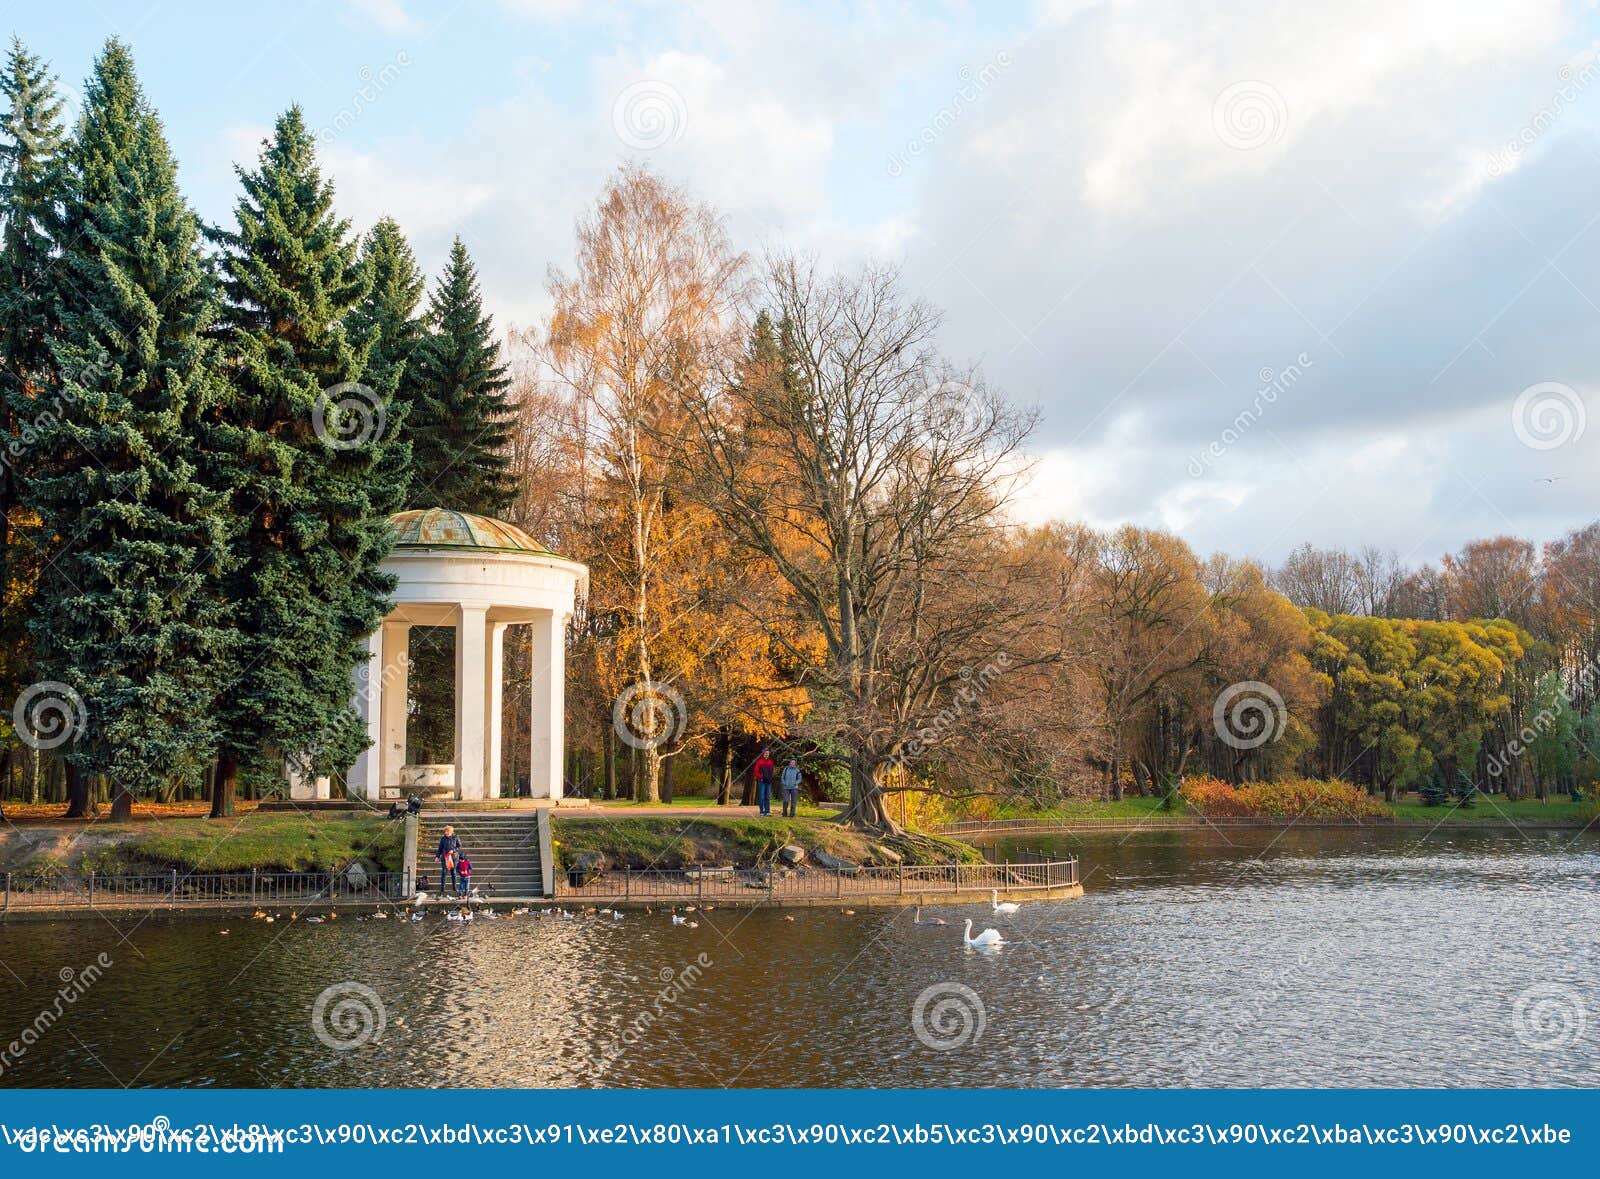 Gazebo-rotunda on the Banks of the Swan Pond in the Autumn. Editorial ...